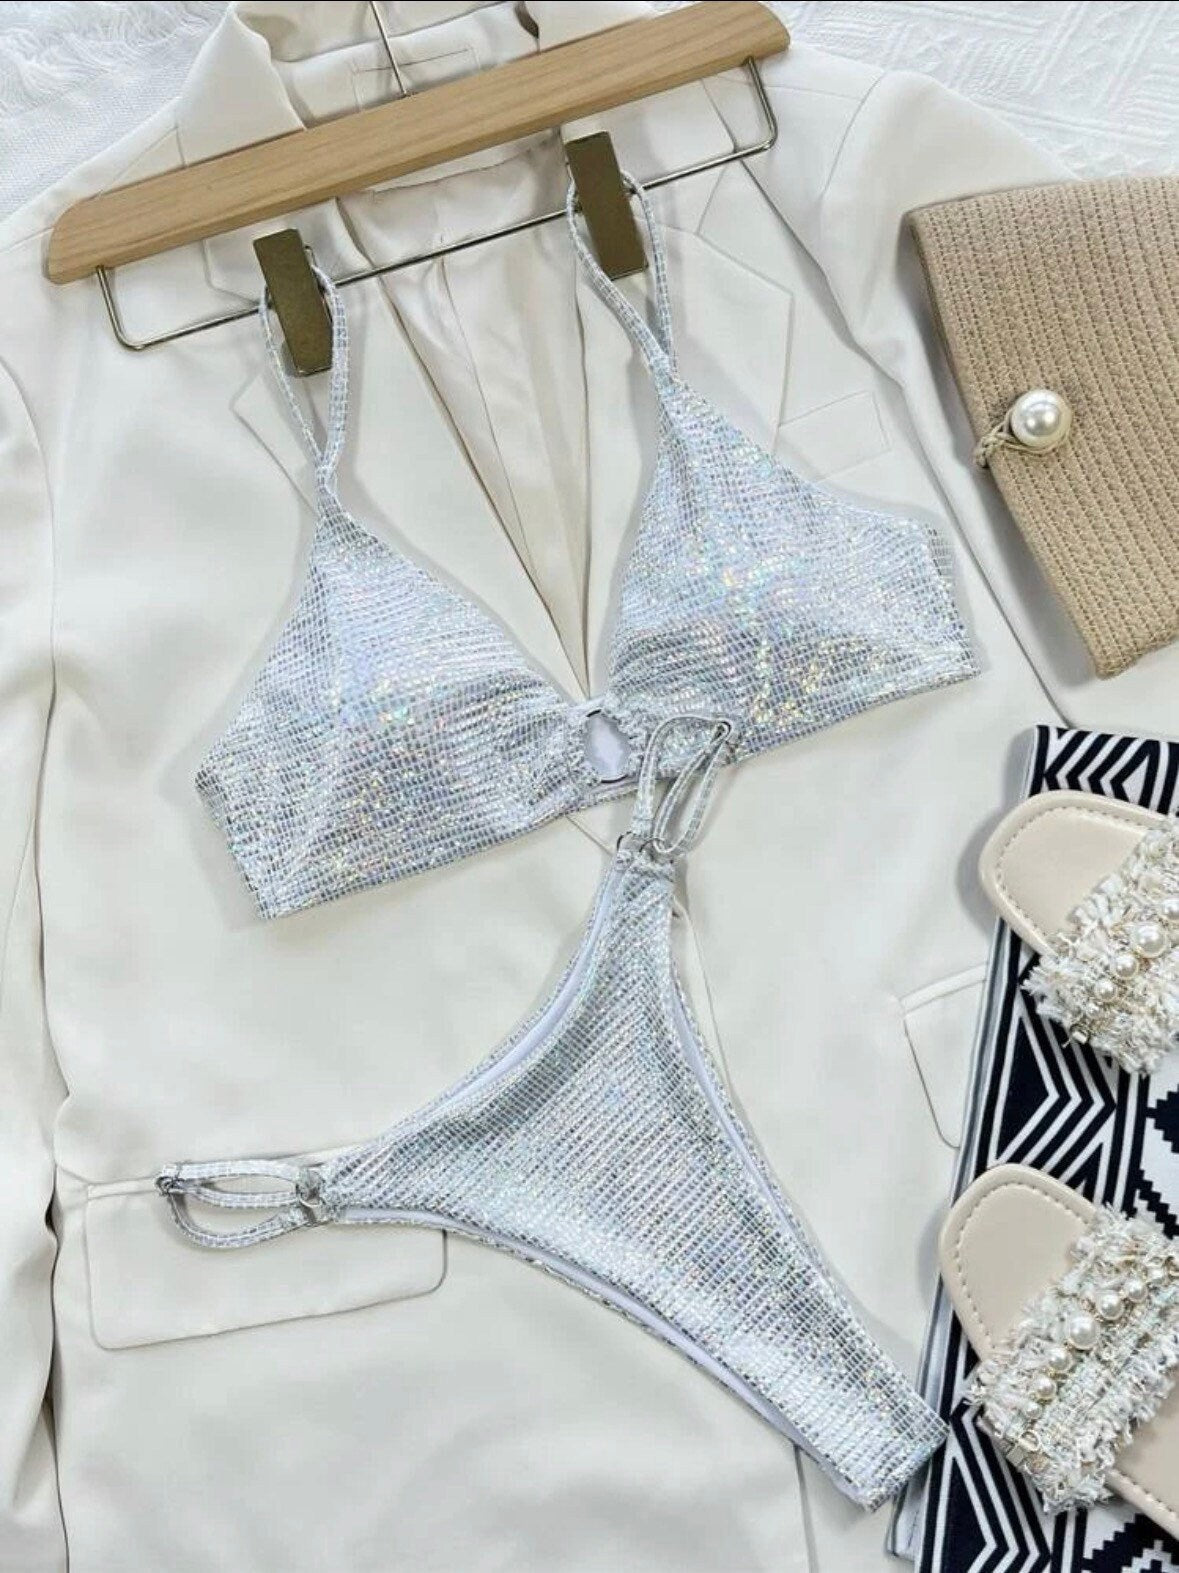 The Metallic silver glitter print swim bikini with tie sides silver white triangle cut out top tie and bottoms sparkly swimsuit set